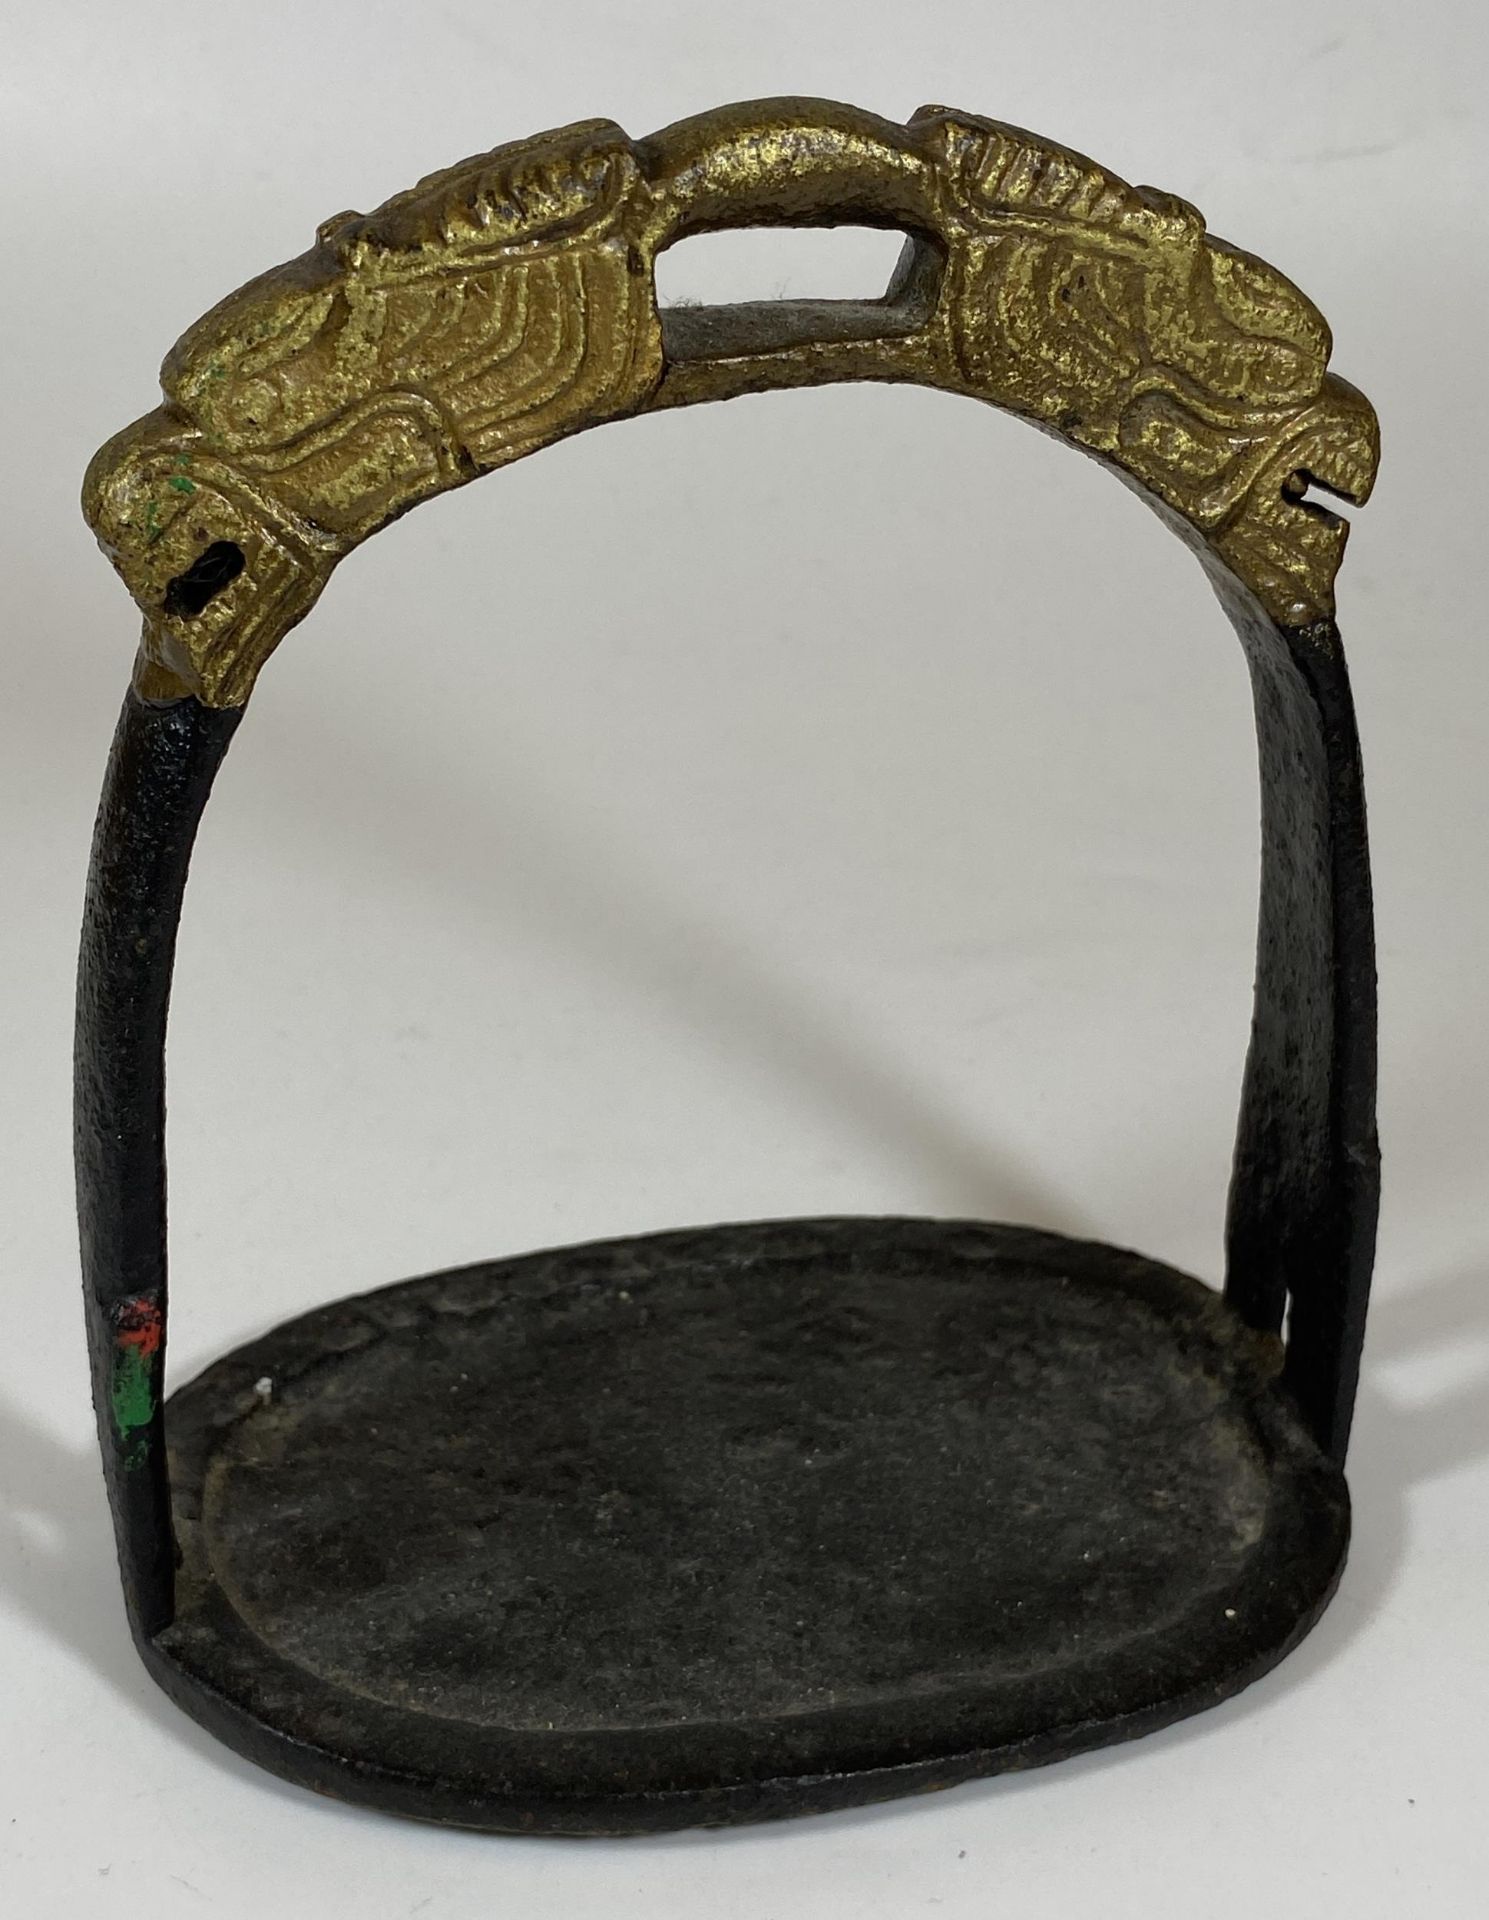 A SOLID CAST IRON ORIENTAL STIRRUP WITH DRAGON HEAD DESIGN, HEIGHT 15CM